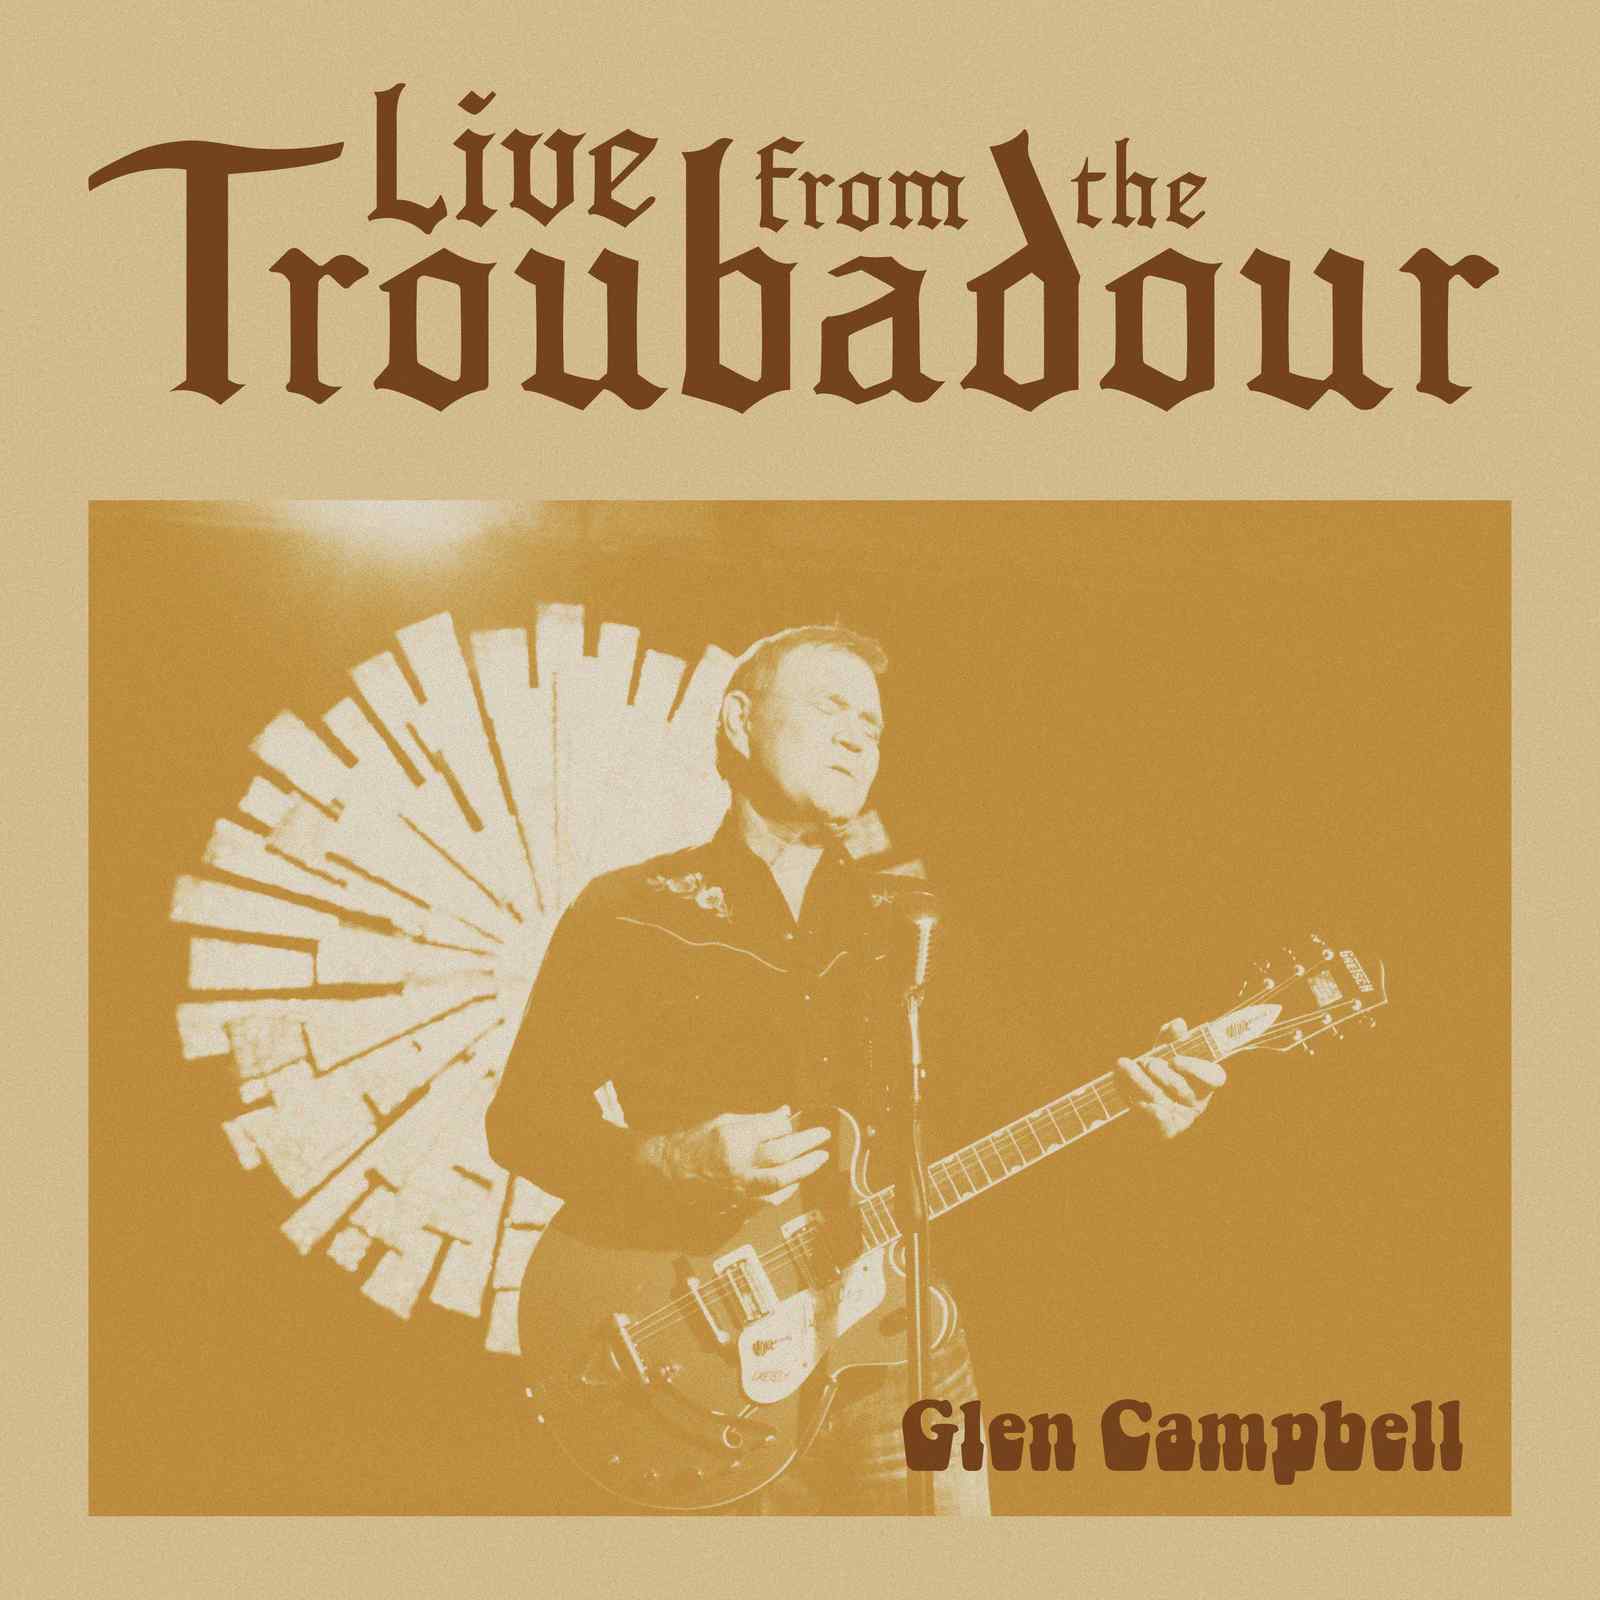 Live From The Troubadour by Glen Campbell